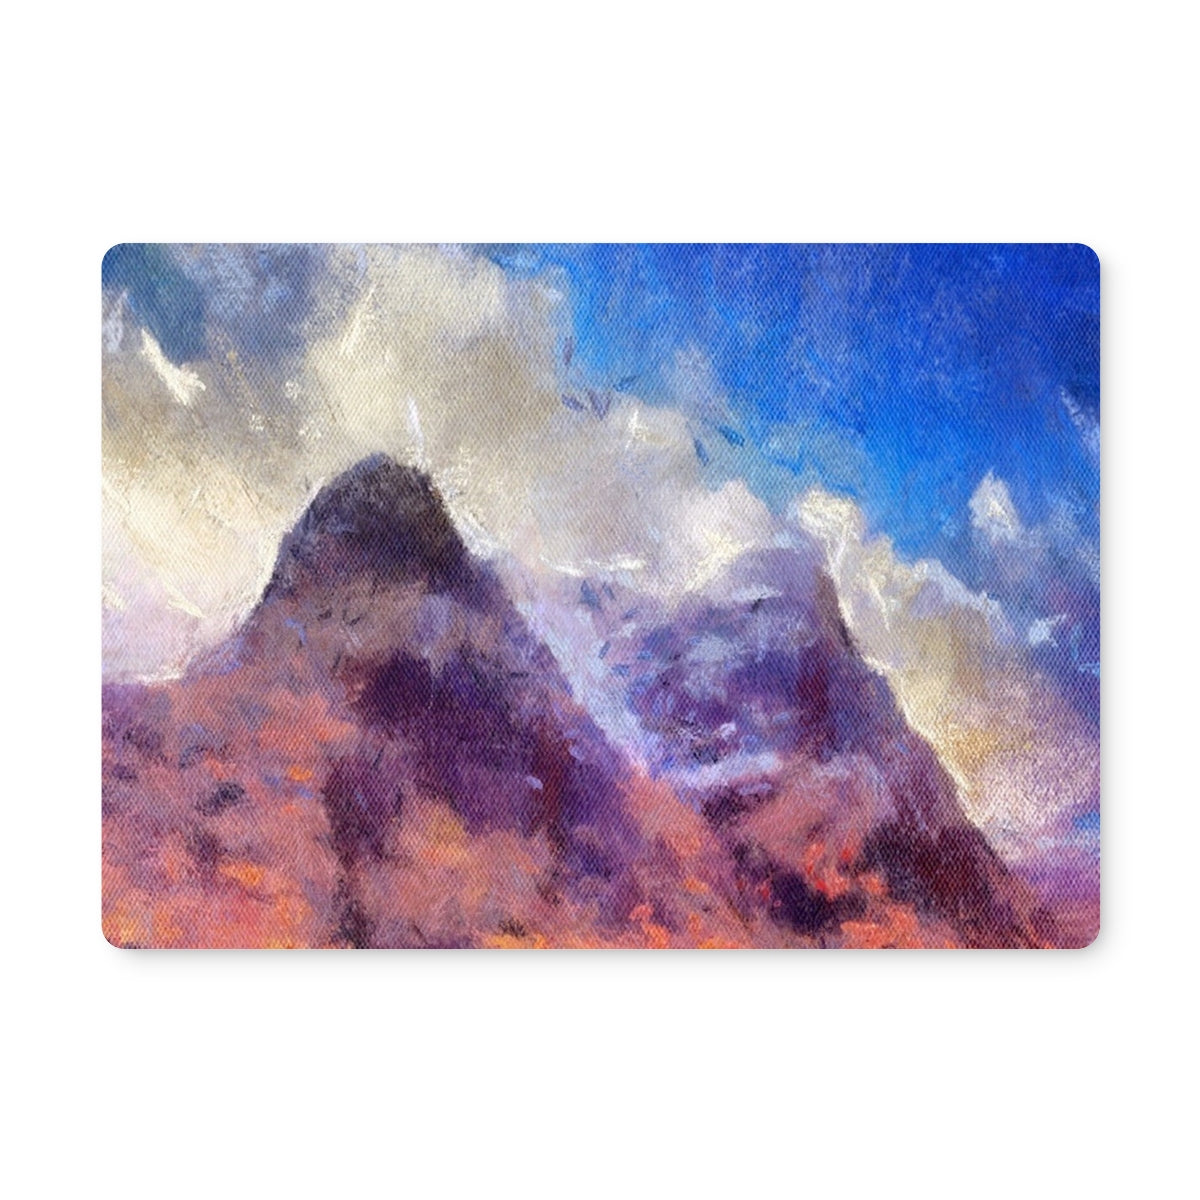 Glencoe Art Gifts Placemat-Placemats-Glencoe Art Gallery-2 Placemats-Paintings, Prints, Homeware, Art Gifts From Scotland By Scottish Artist Kevin Hunter